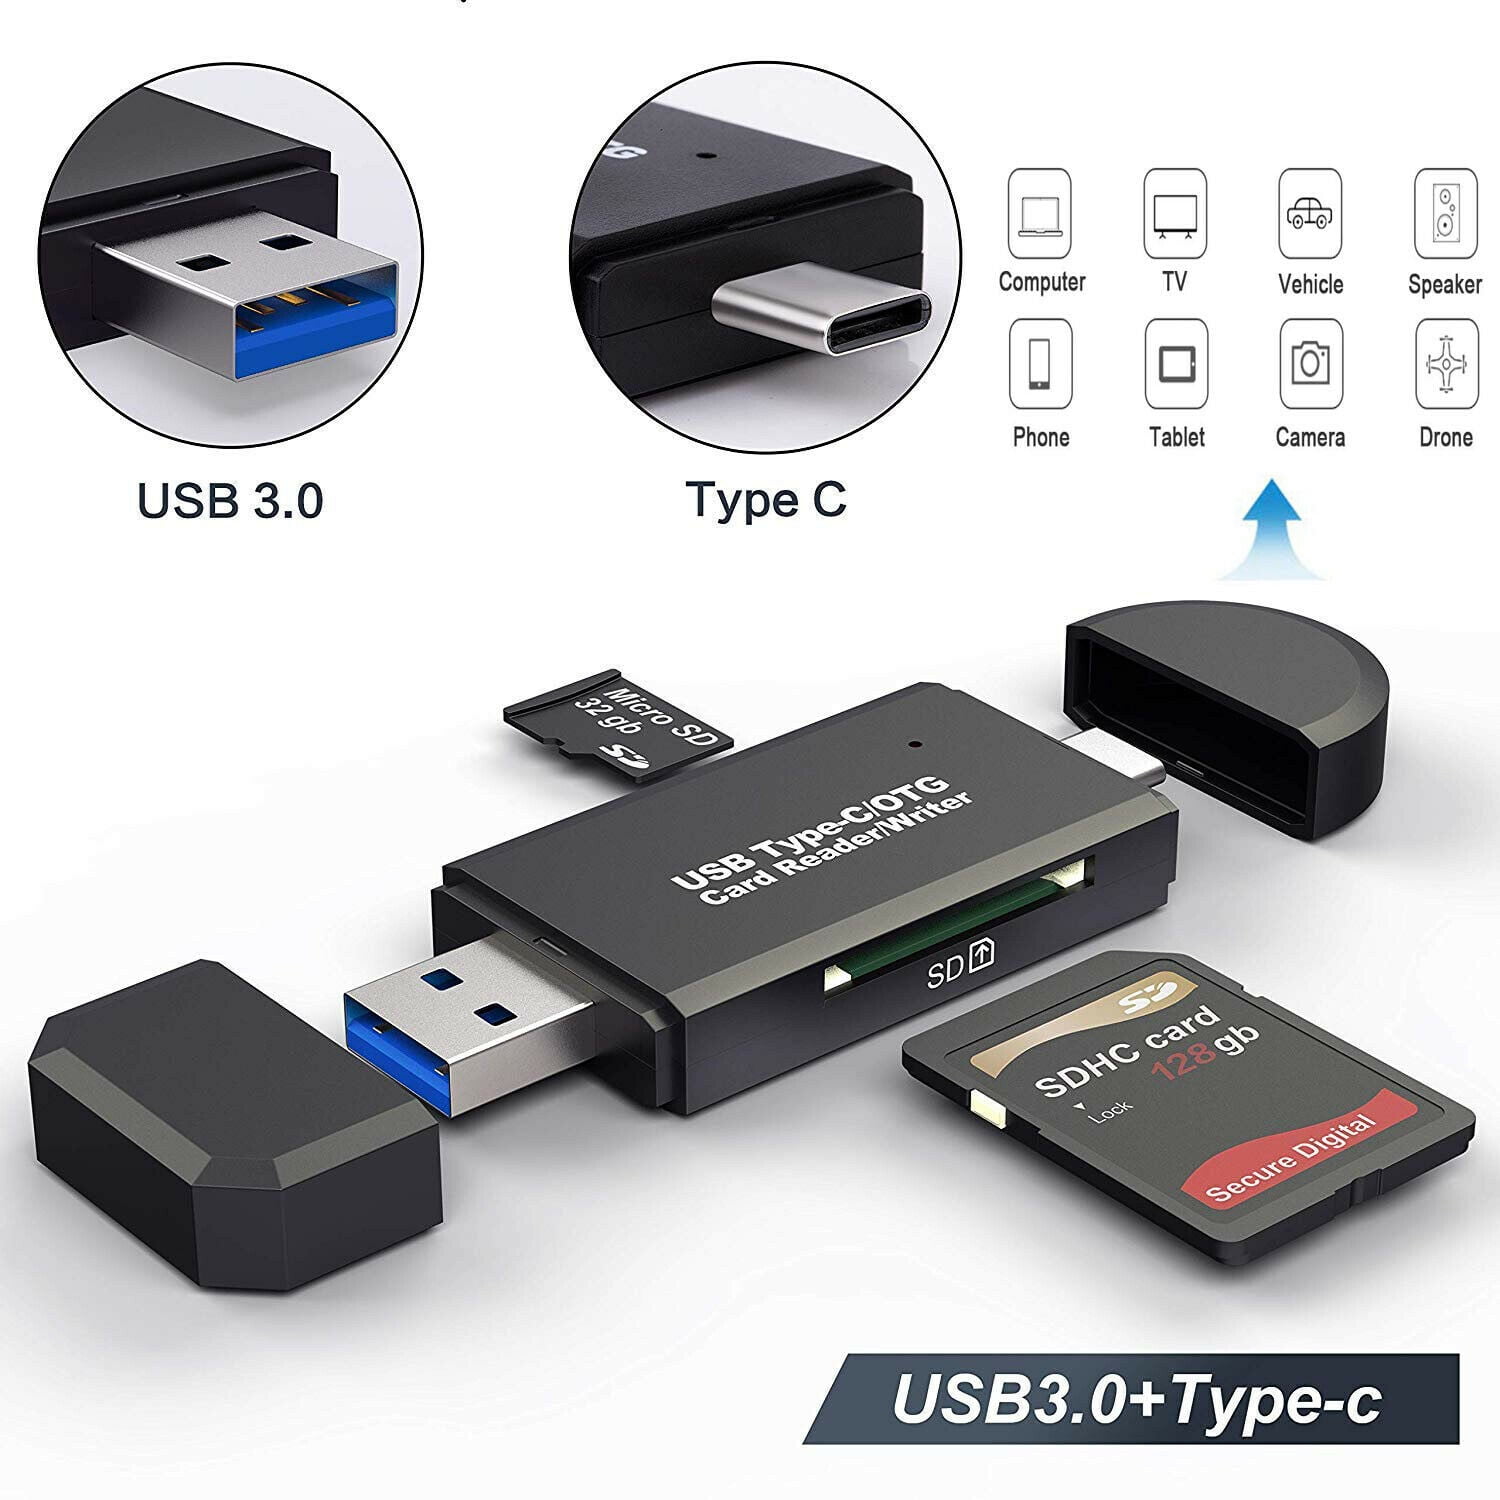 DEYE SD Card Reader,Micro SD/TF Compact Flash Card Reader with 4 in 1 Adapter and OTG Portable Memory Card Reader for PC/Smart Phones/Tablets USB 2.0 